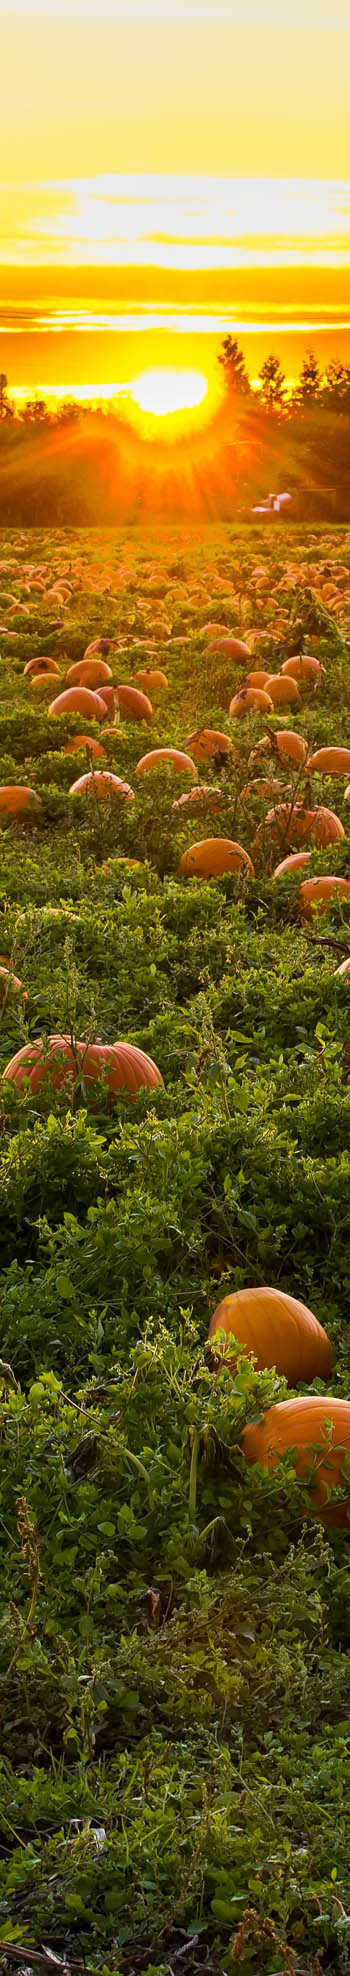 Pick Your Own Pumpkin Field Picture